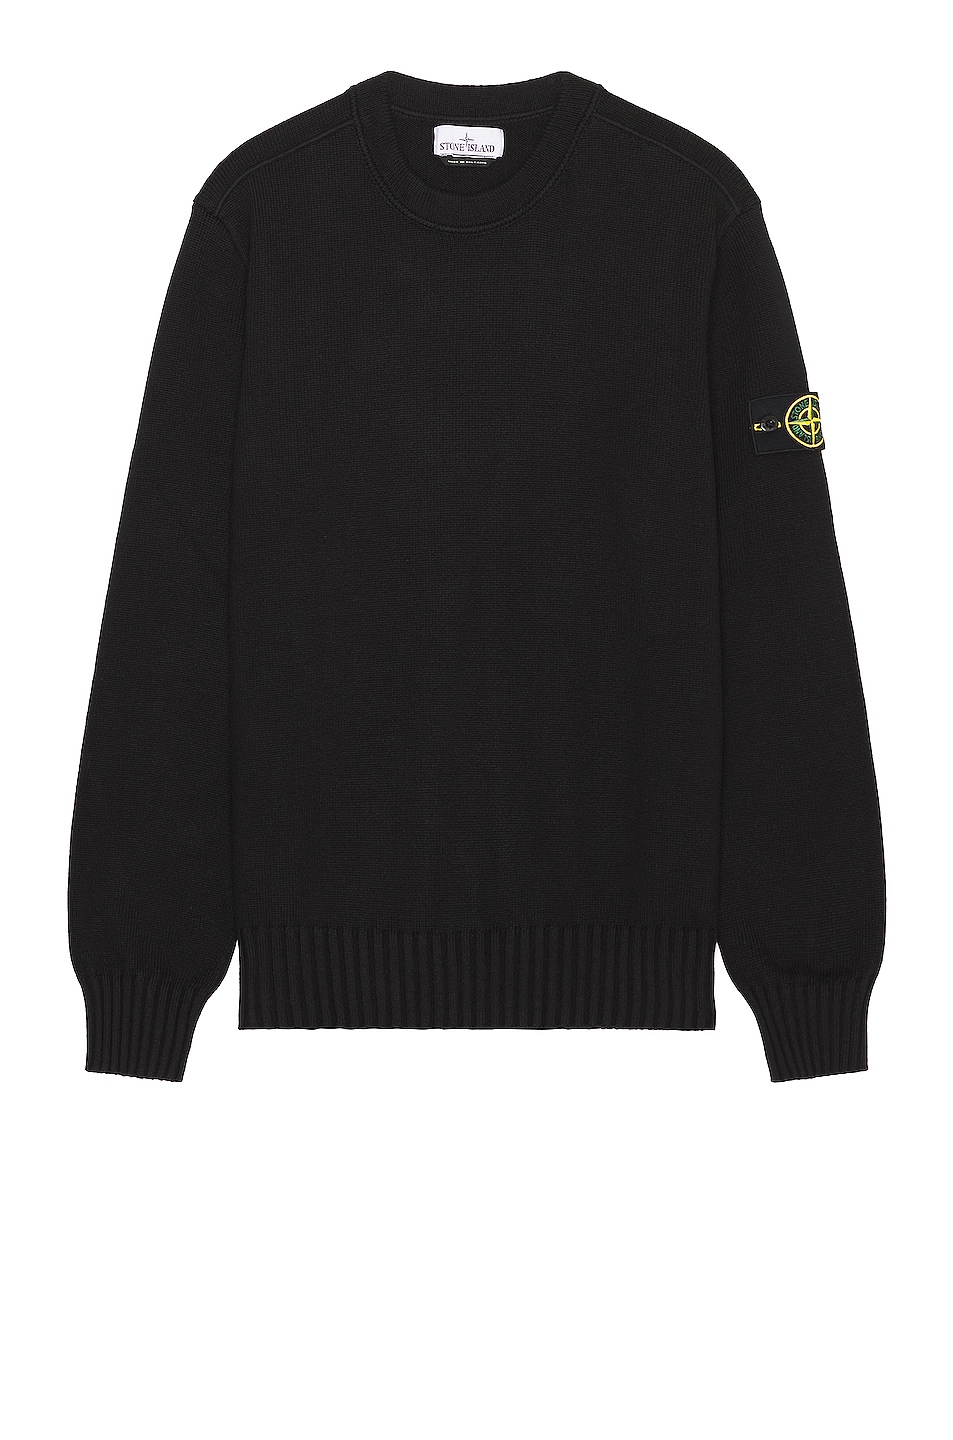 Image 1 of Stone Island Knit Sweater in Black